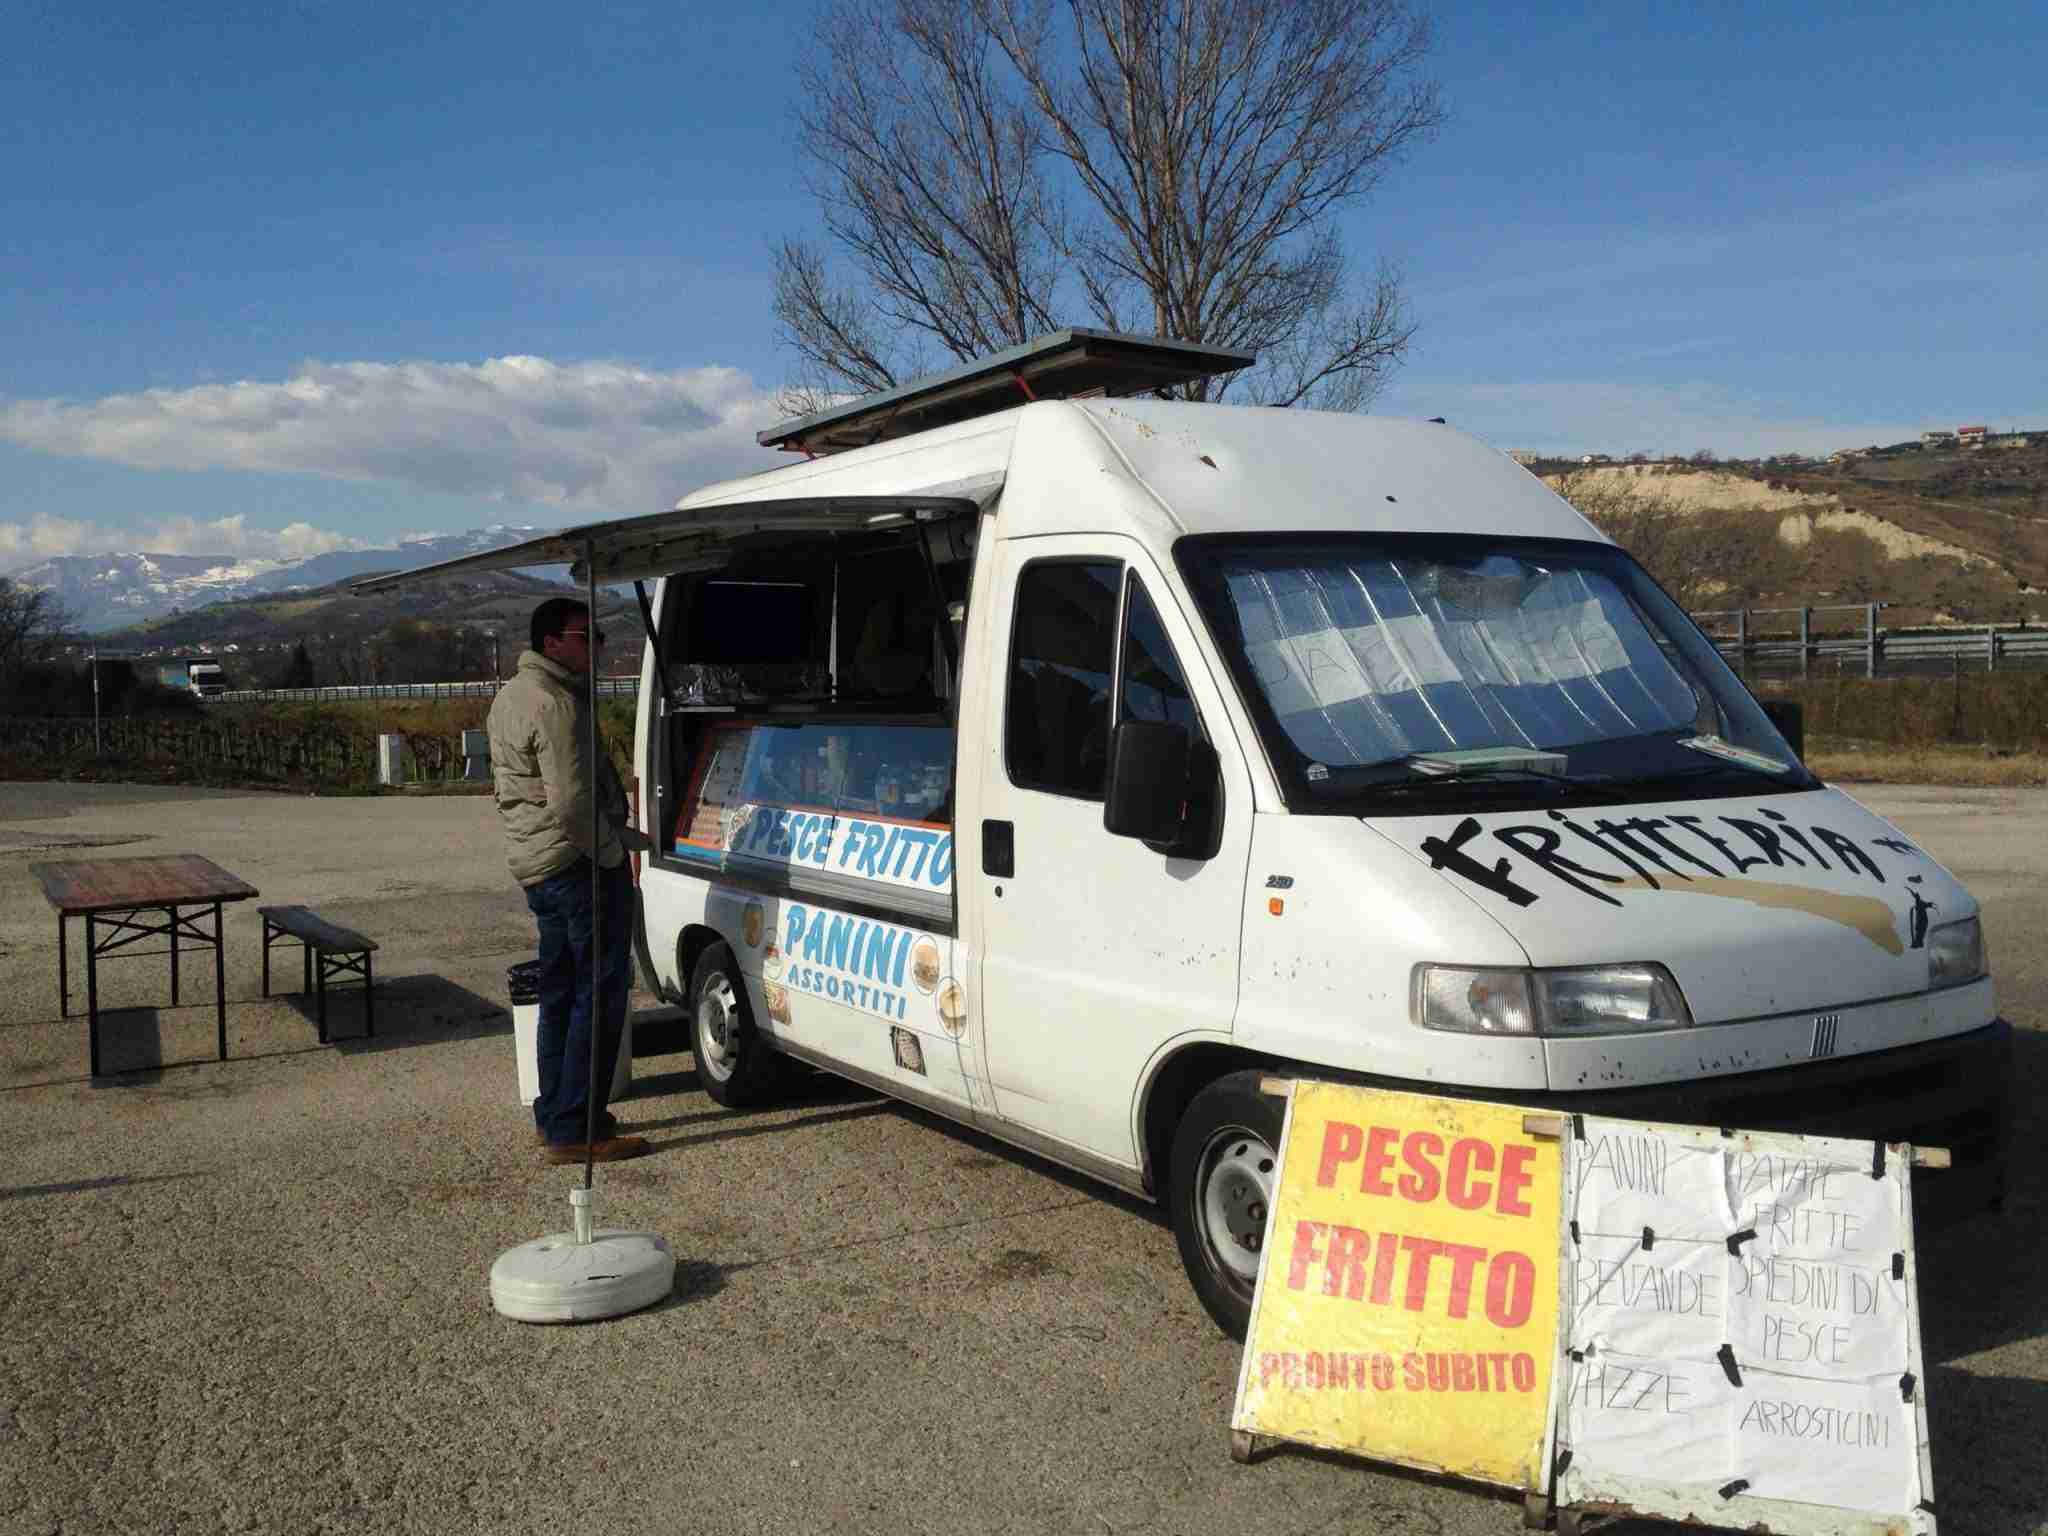 Fried fish food truck on the highway in Abruzzo